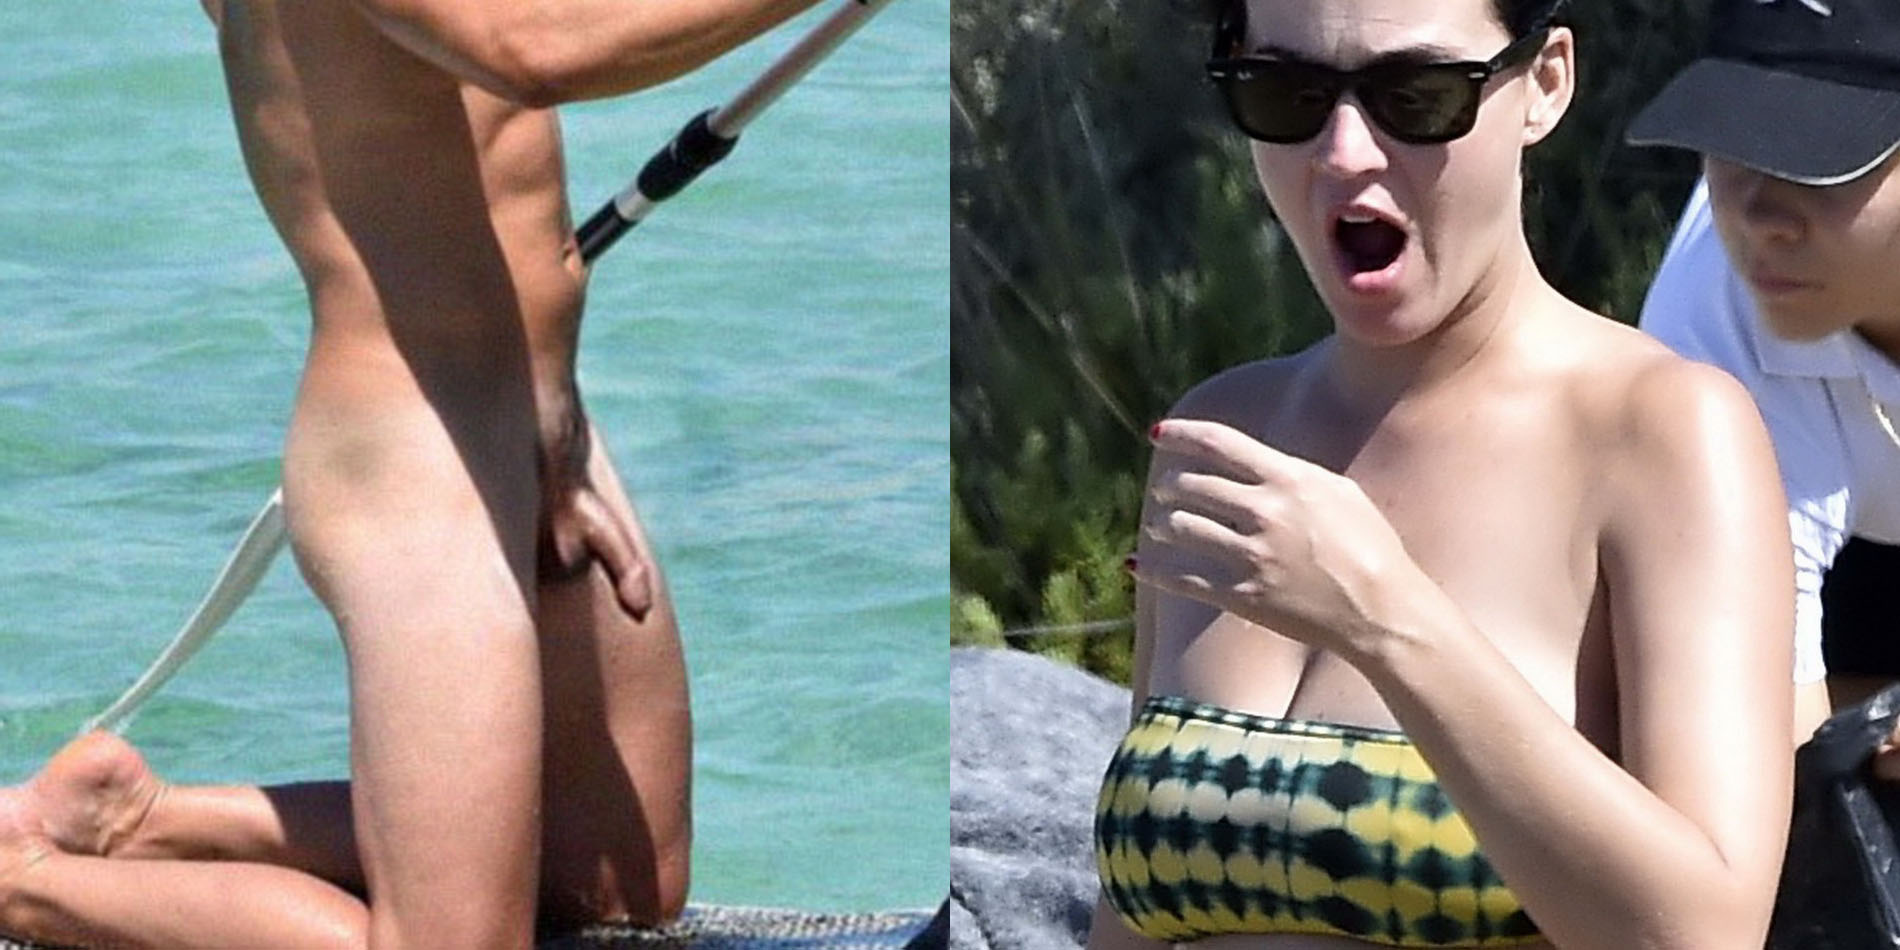 Naked Photos of Katy Perry and Orlando Bloom #79626179